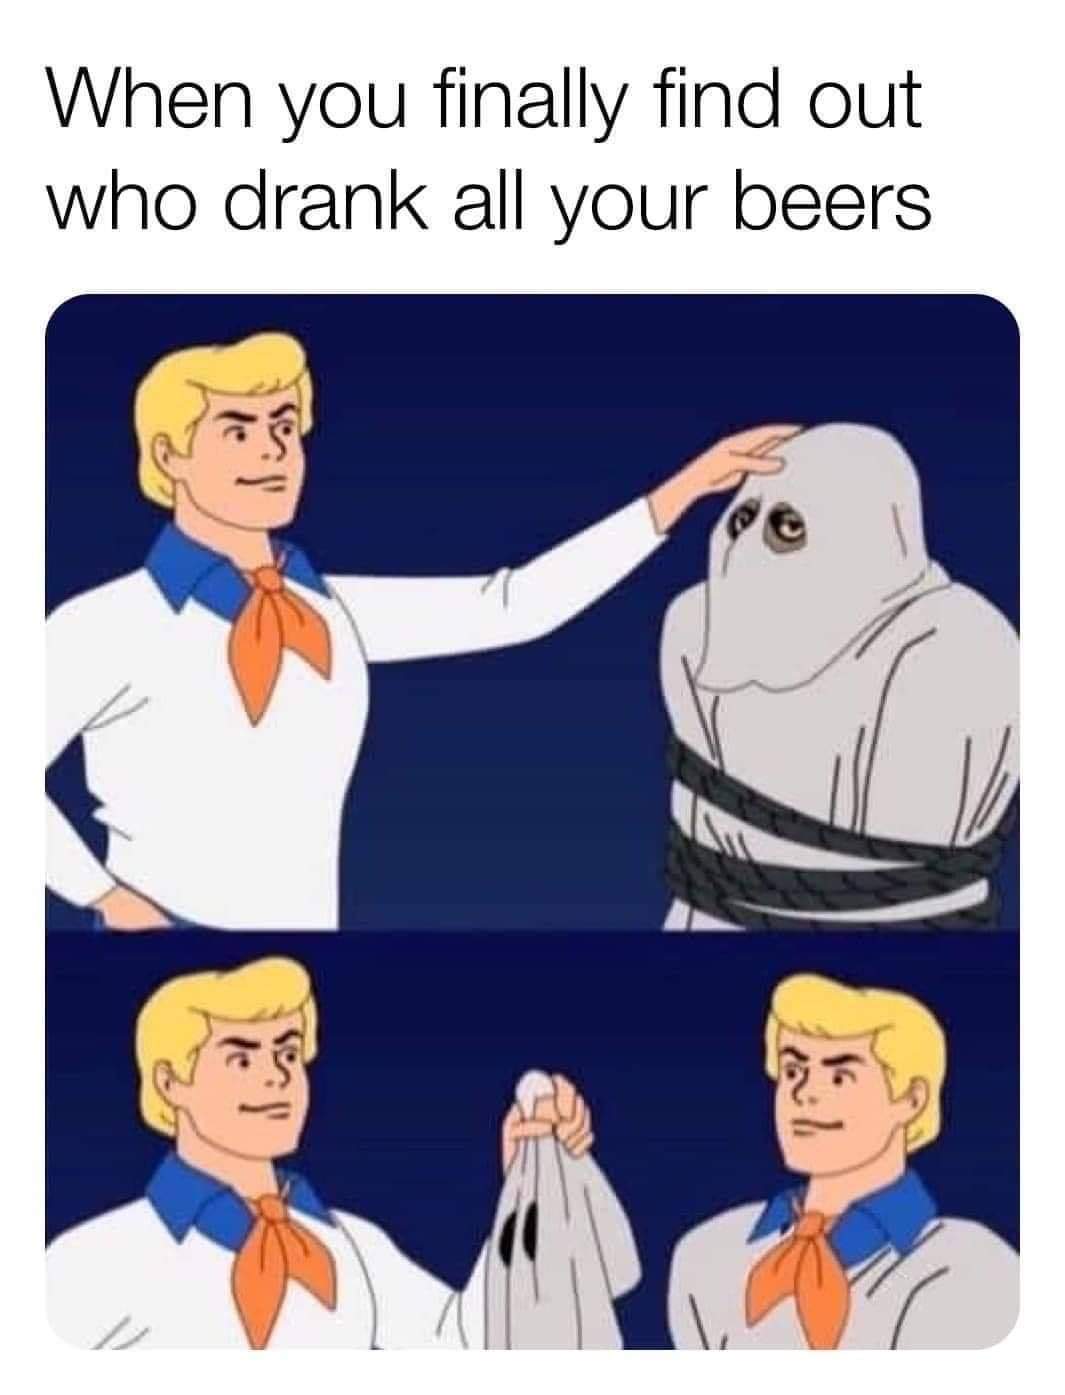 you find out who drank all your beers - When you finally find out who drank all your beers